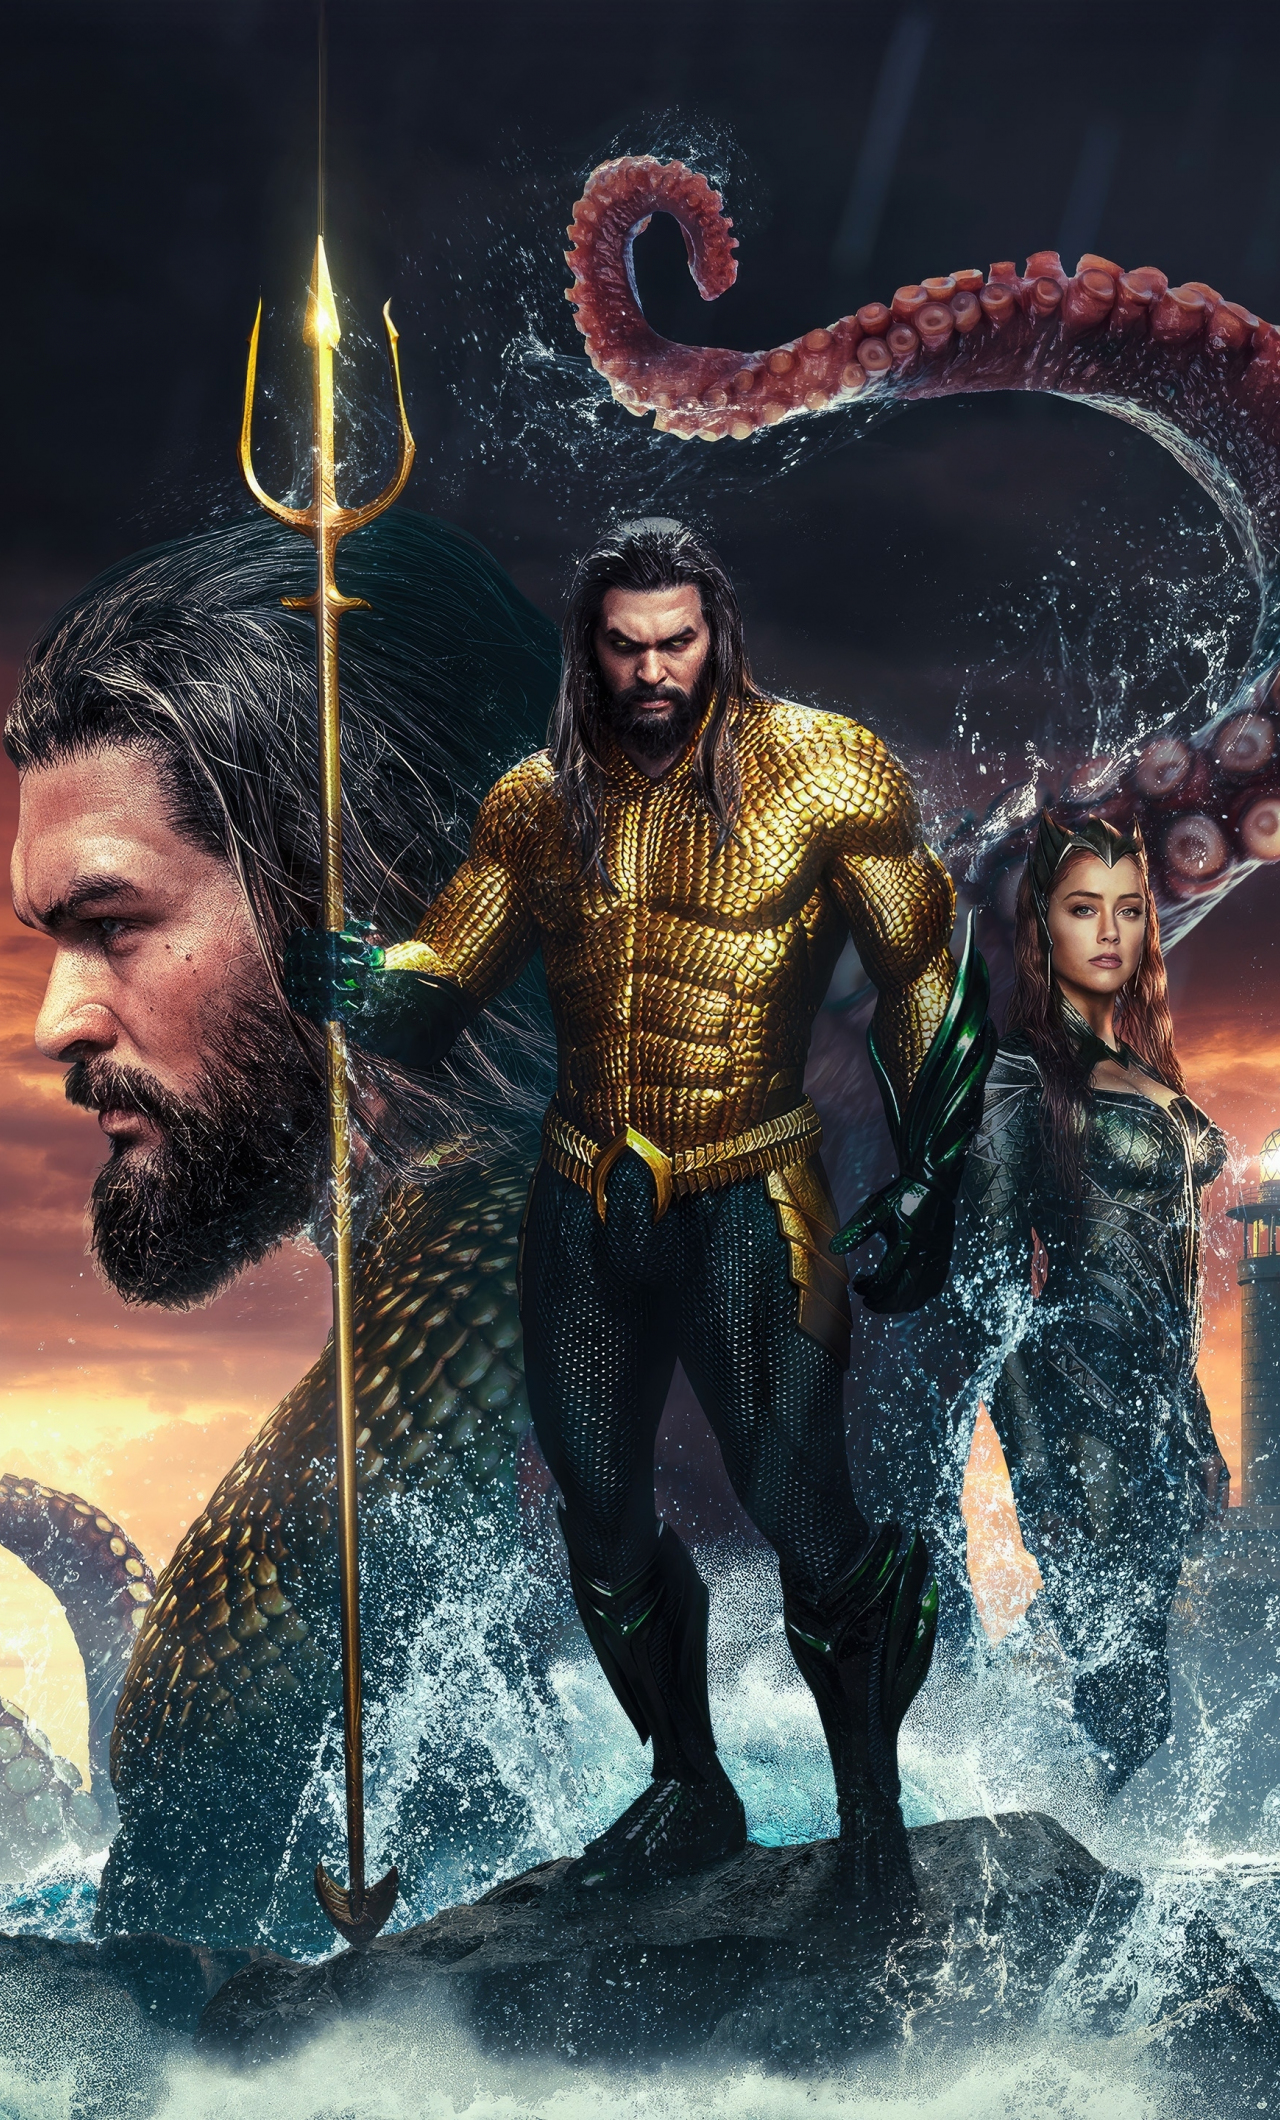 Download wallpaper 1280x2120 aquaman and the lost kingdom, artwork, fan made poster, iphone 6 plus, 1280x2120 HD background, 30181